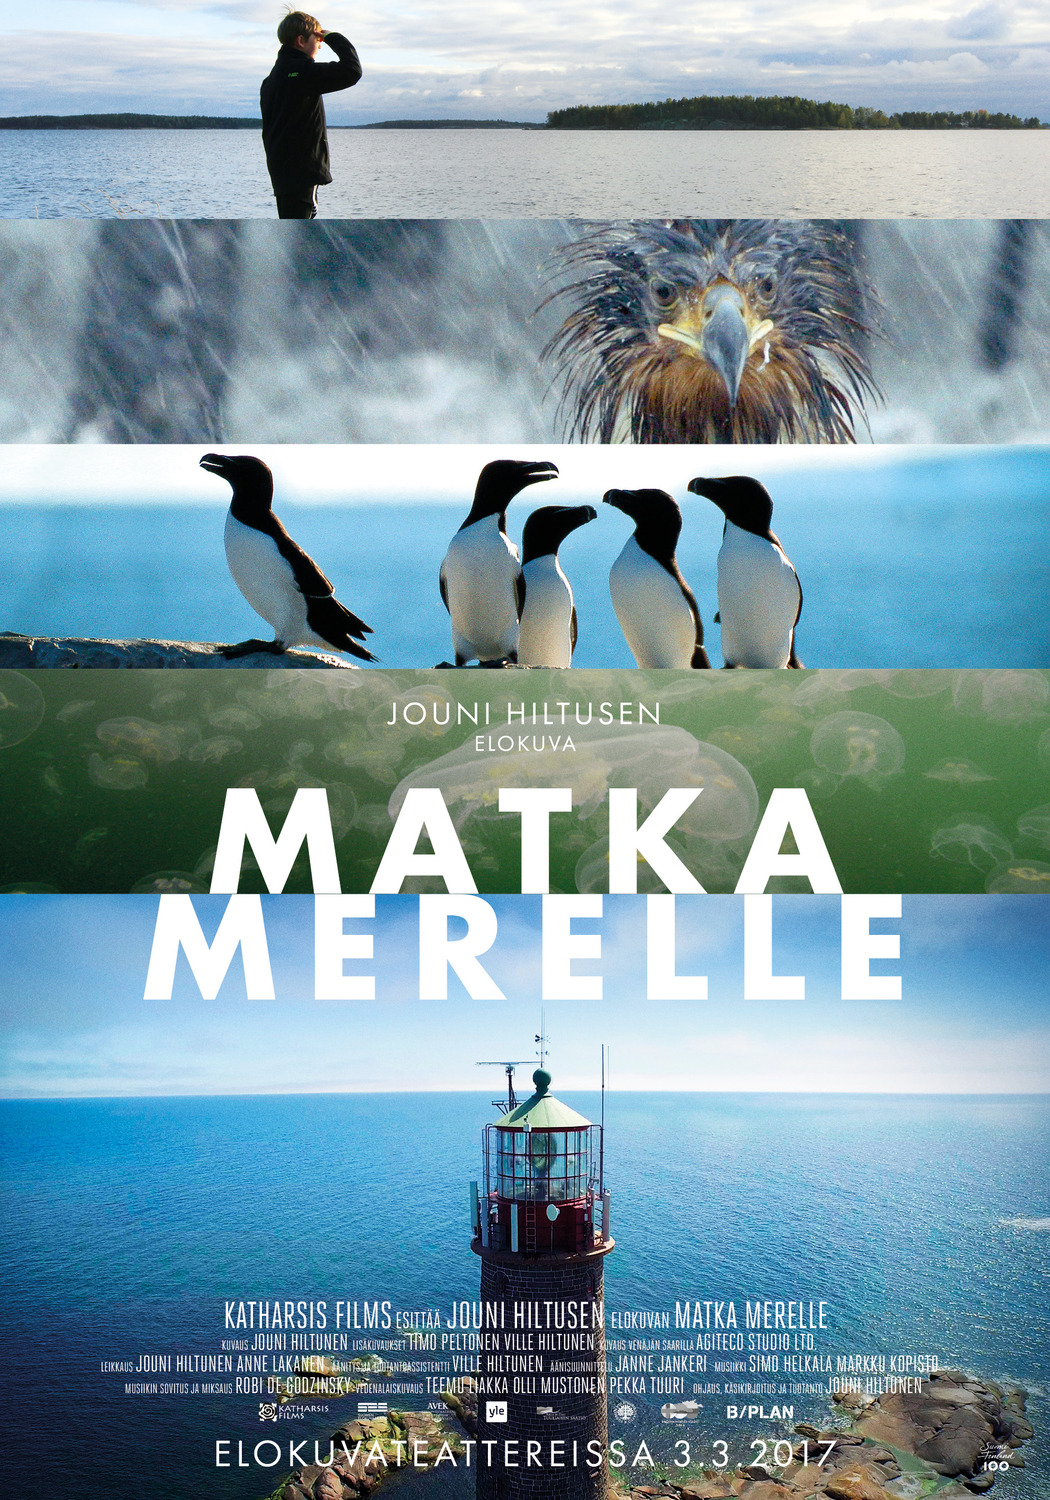 Extra Large Movie Poster Image for Matka merelle 